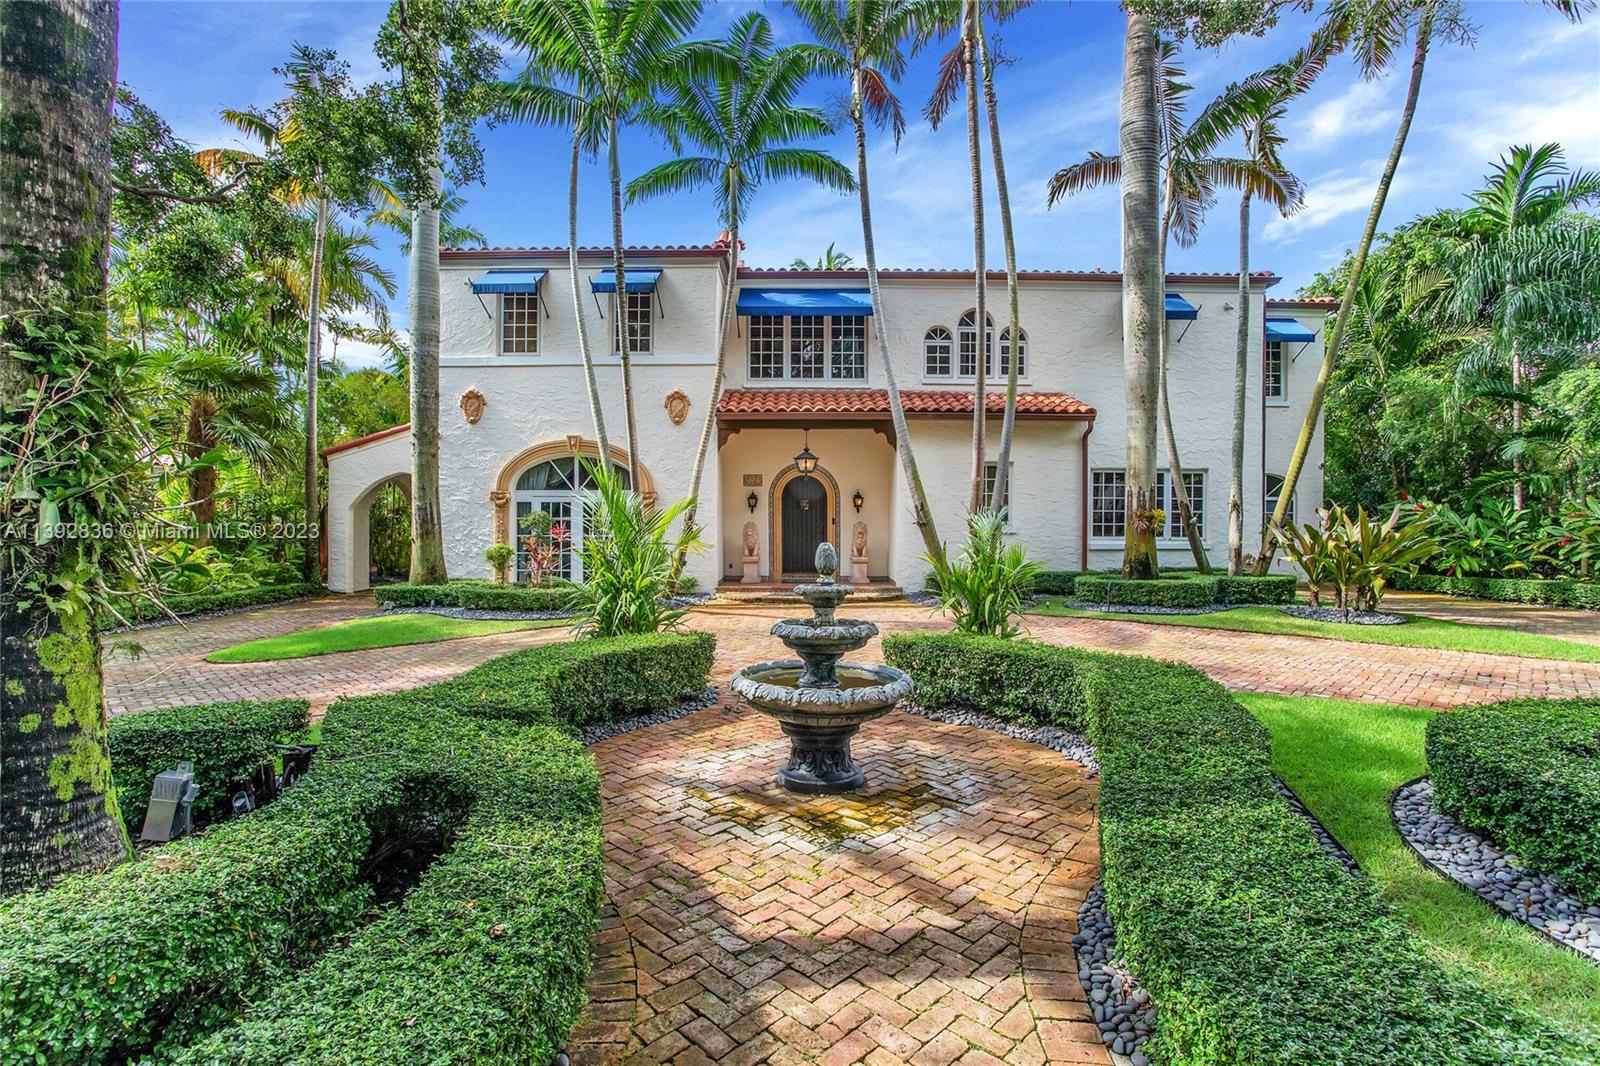 Majestic Mediterranean mansion on Coral Way. Grand foyer leads to large gracious spaces; living room w/fireplace,library/office w/gas fireplace, dining room, and family room w/bar. Main floor features guest room and staff room, each w/bath, cook's kitchen, breakfast room, and wine cellar. Impact glass French doors open to wide covered terrace w/entertaining area. On the 2nd floor: primary bedroom with massive bath and 2 walk-in closets; two other bedrooms each with private bath. Home was renovated in 2006 preserving the Old Spanish look and charm w/wood, marble, and tile floors, beamed ceilings and original stained glass. Pool area features a cabana w/bath, steam room, and a 2nd wine cellar (possible guest cottage). Impact glass throughout, roof and ACs new in 2022.